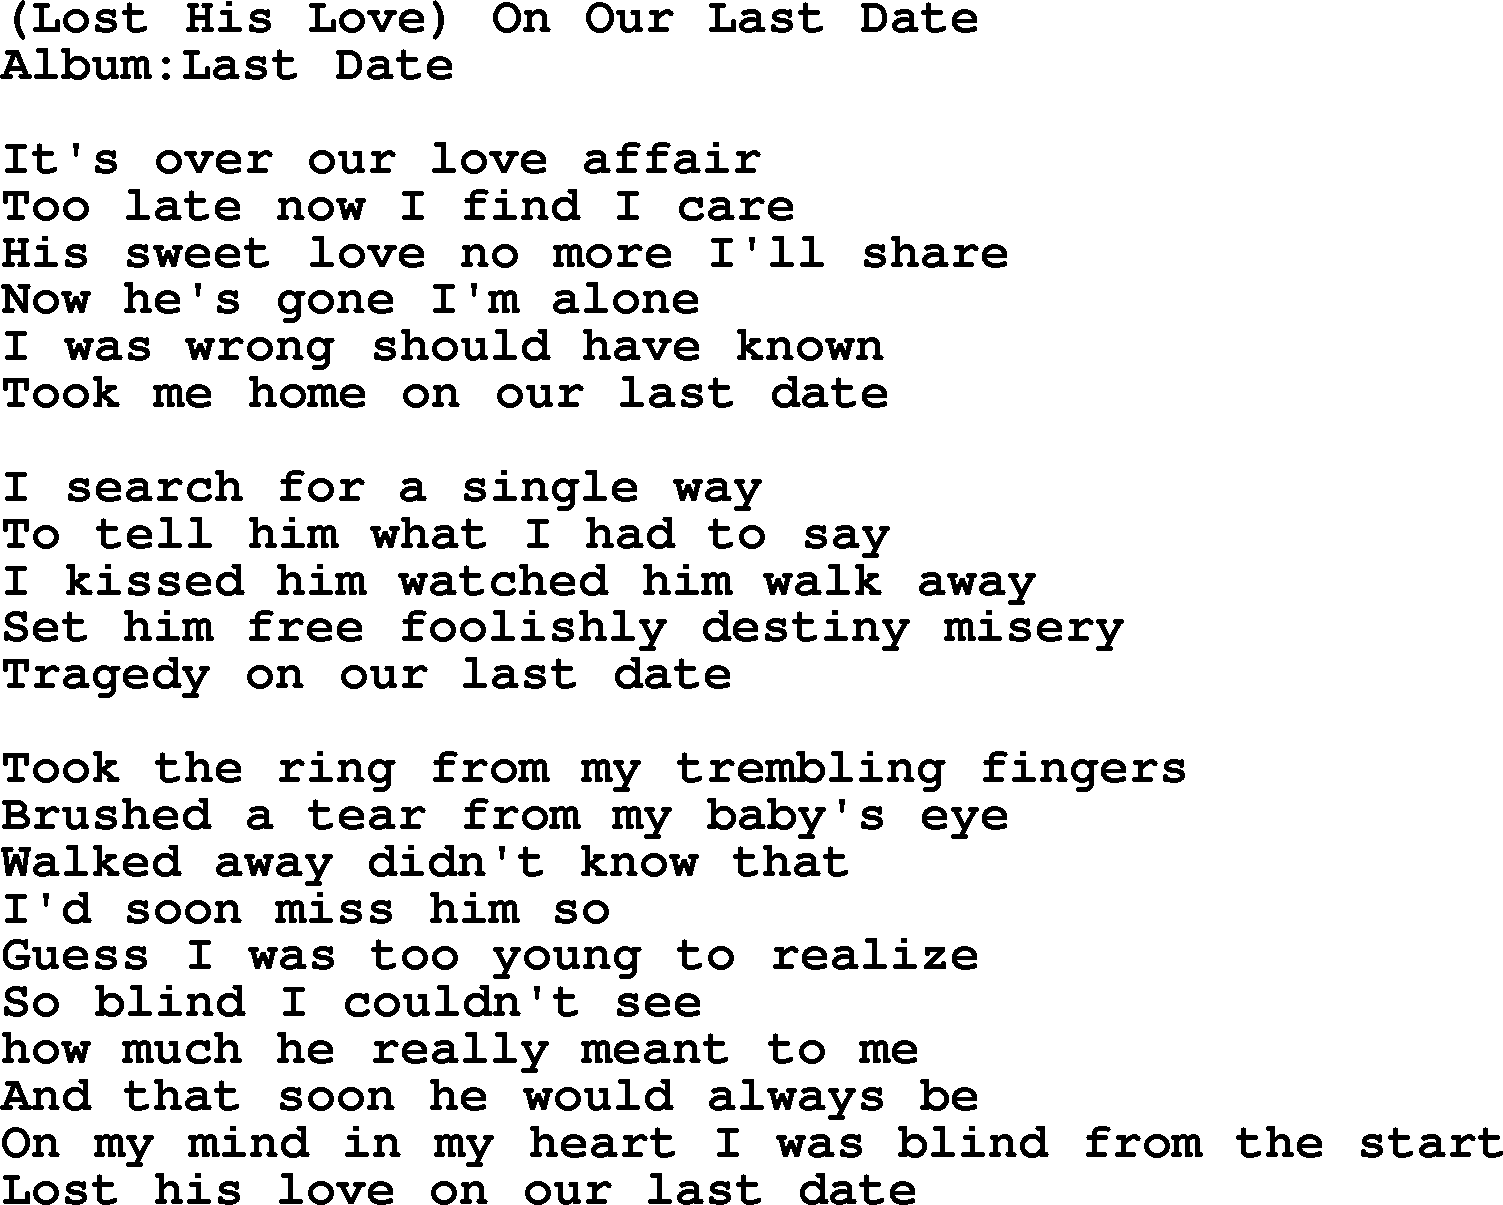 Emmylou Harris song: Lost His Love On Our Last Date lyrics